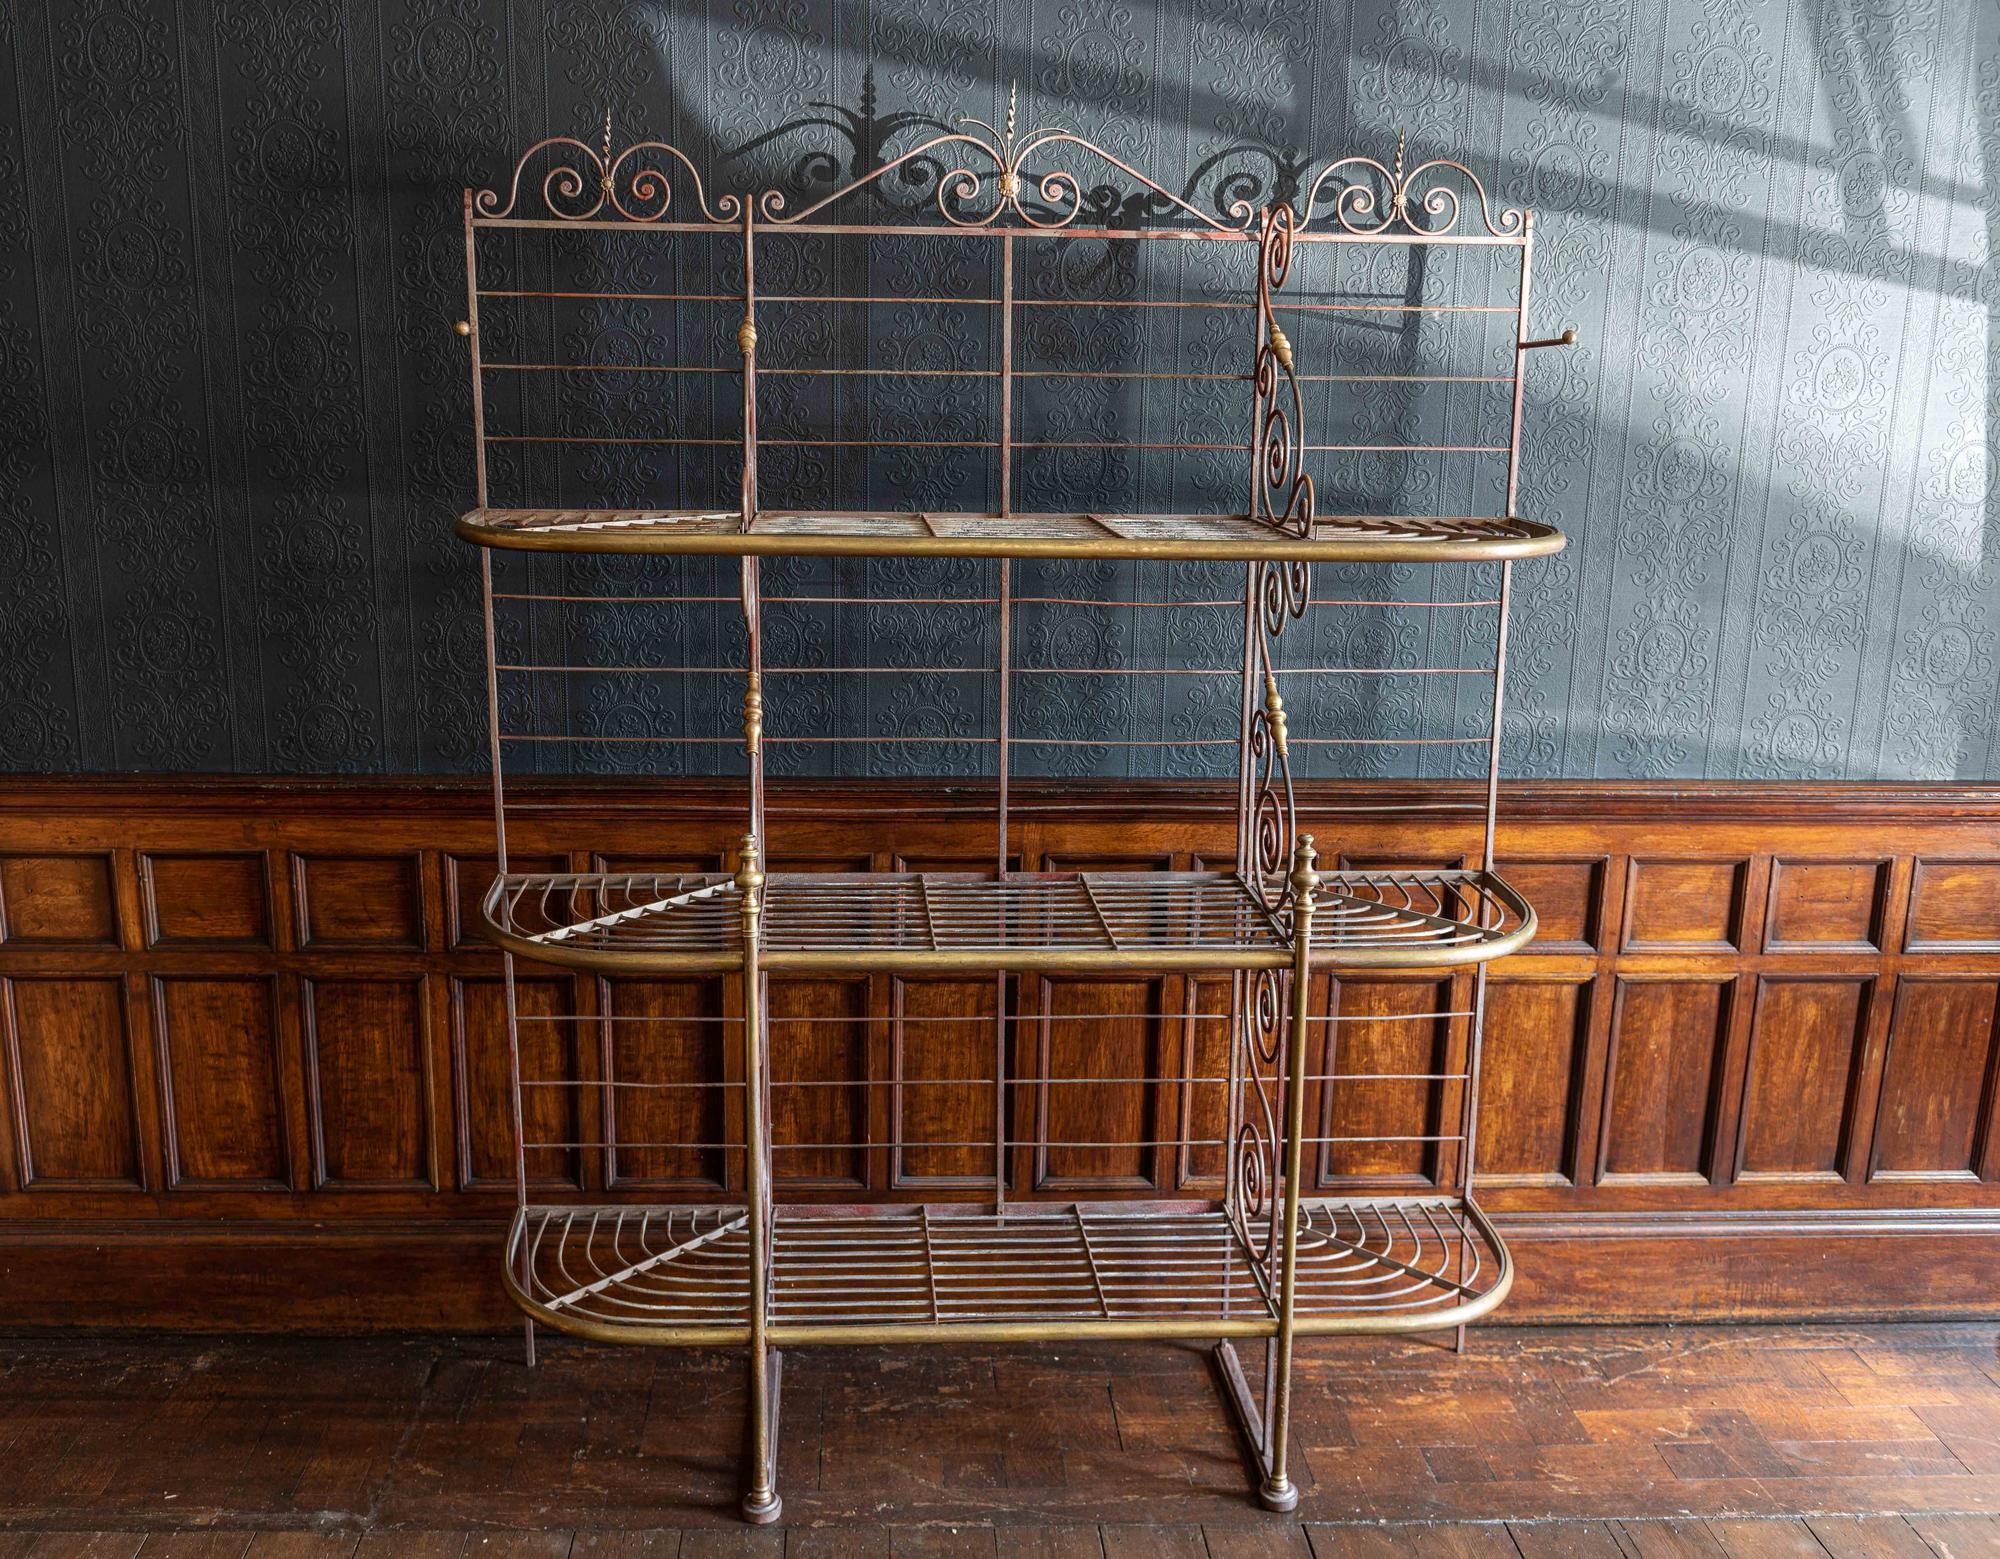 Large French Parisian wrought iron & brass Boulangerie Baker's rack, circa 1900.

Sourced in Paris, silver/grey with the original red color showing through in places.
Decorative brass columns, finials and shelf edging trim.